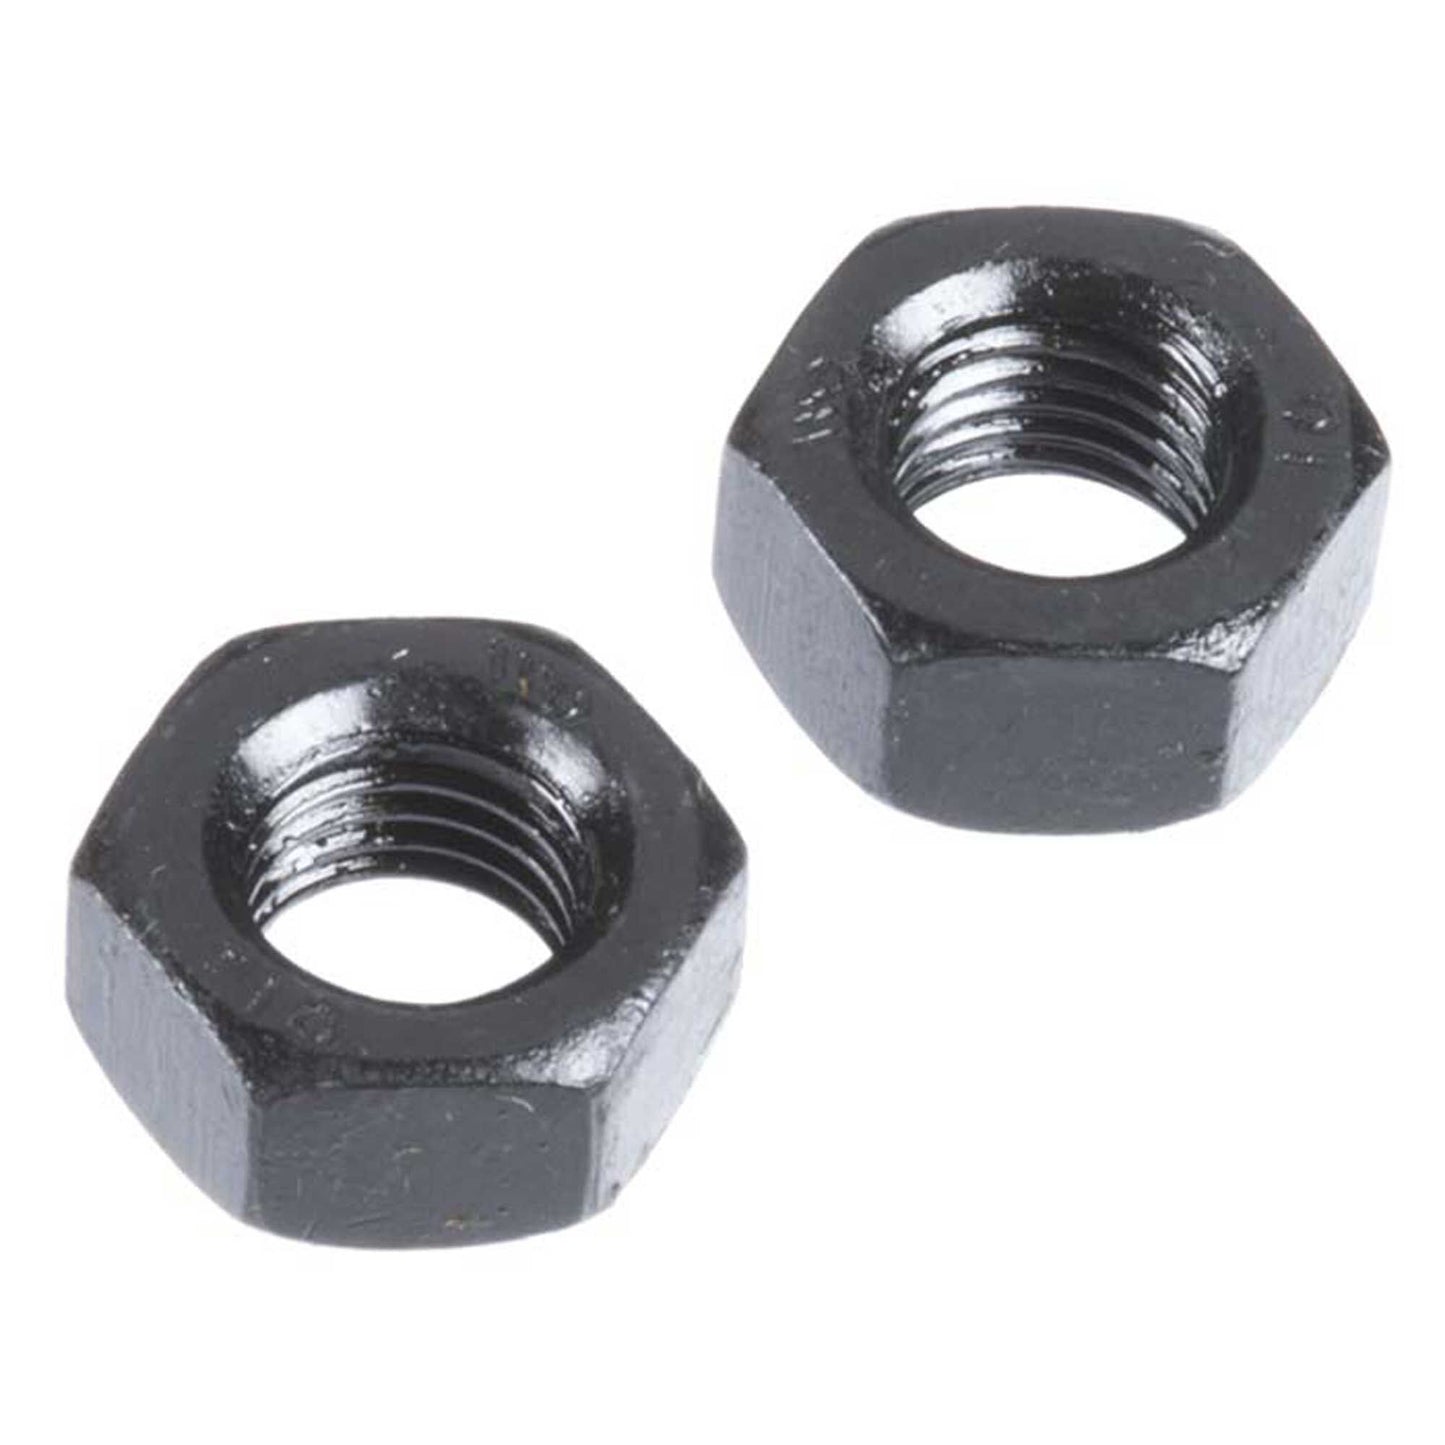 Propeller Drive Nut: DLE-20RA